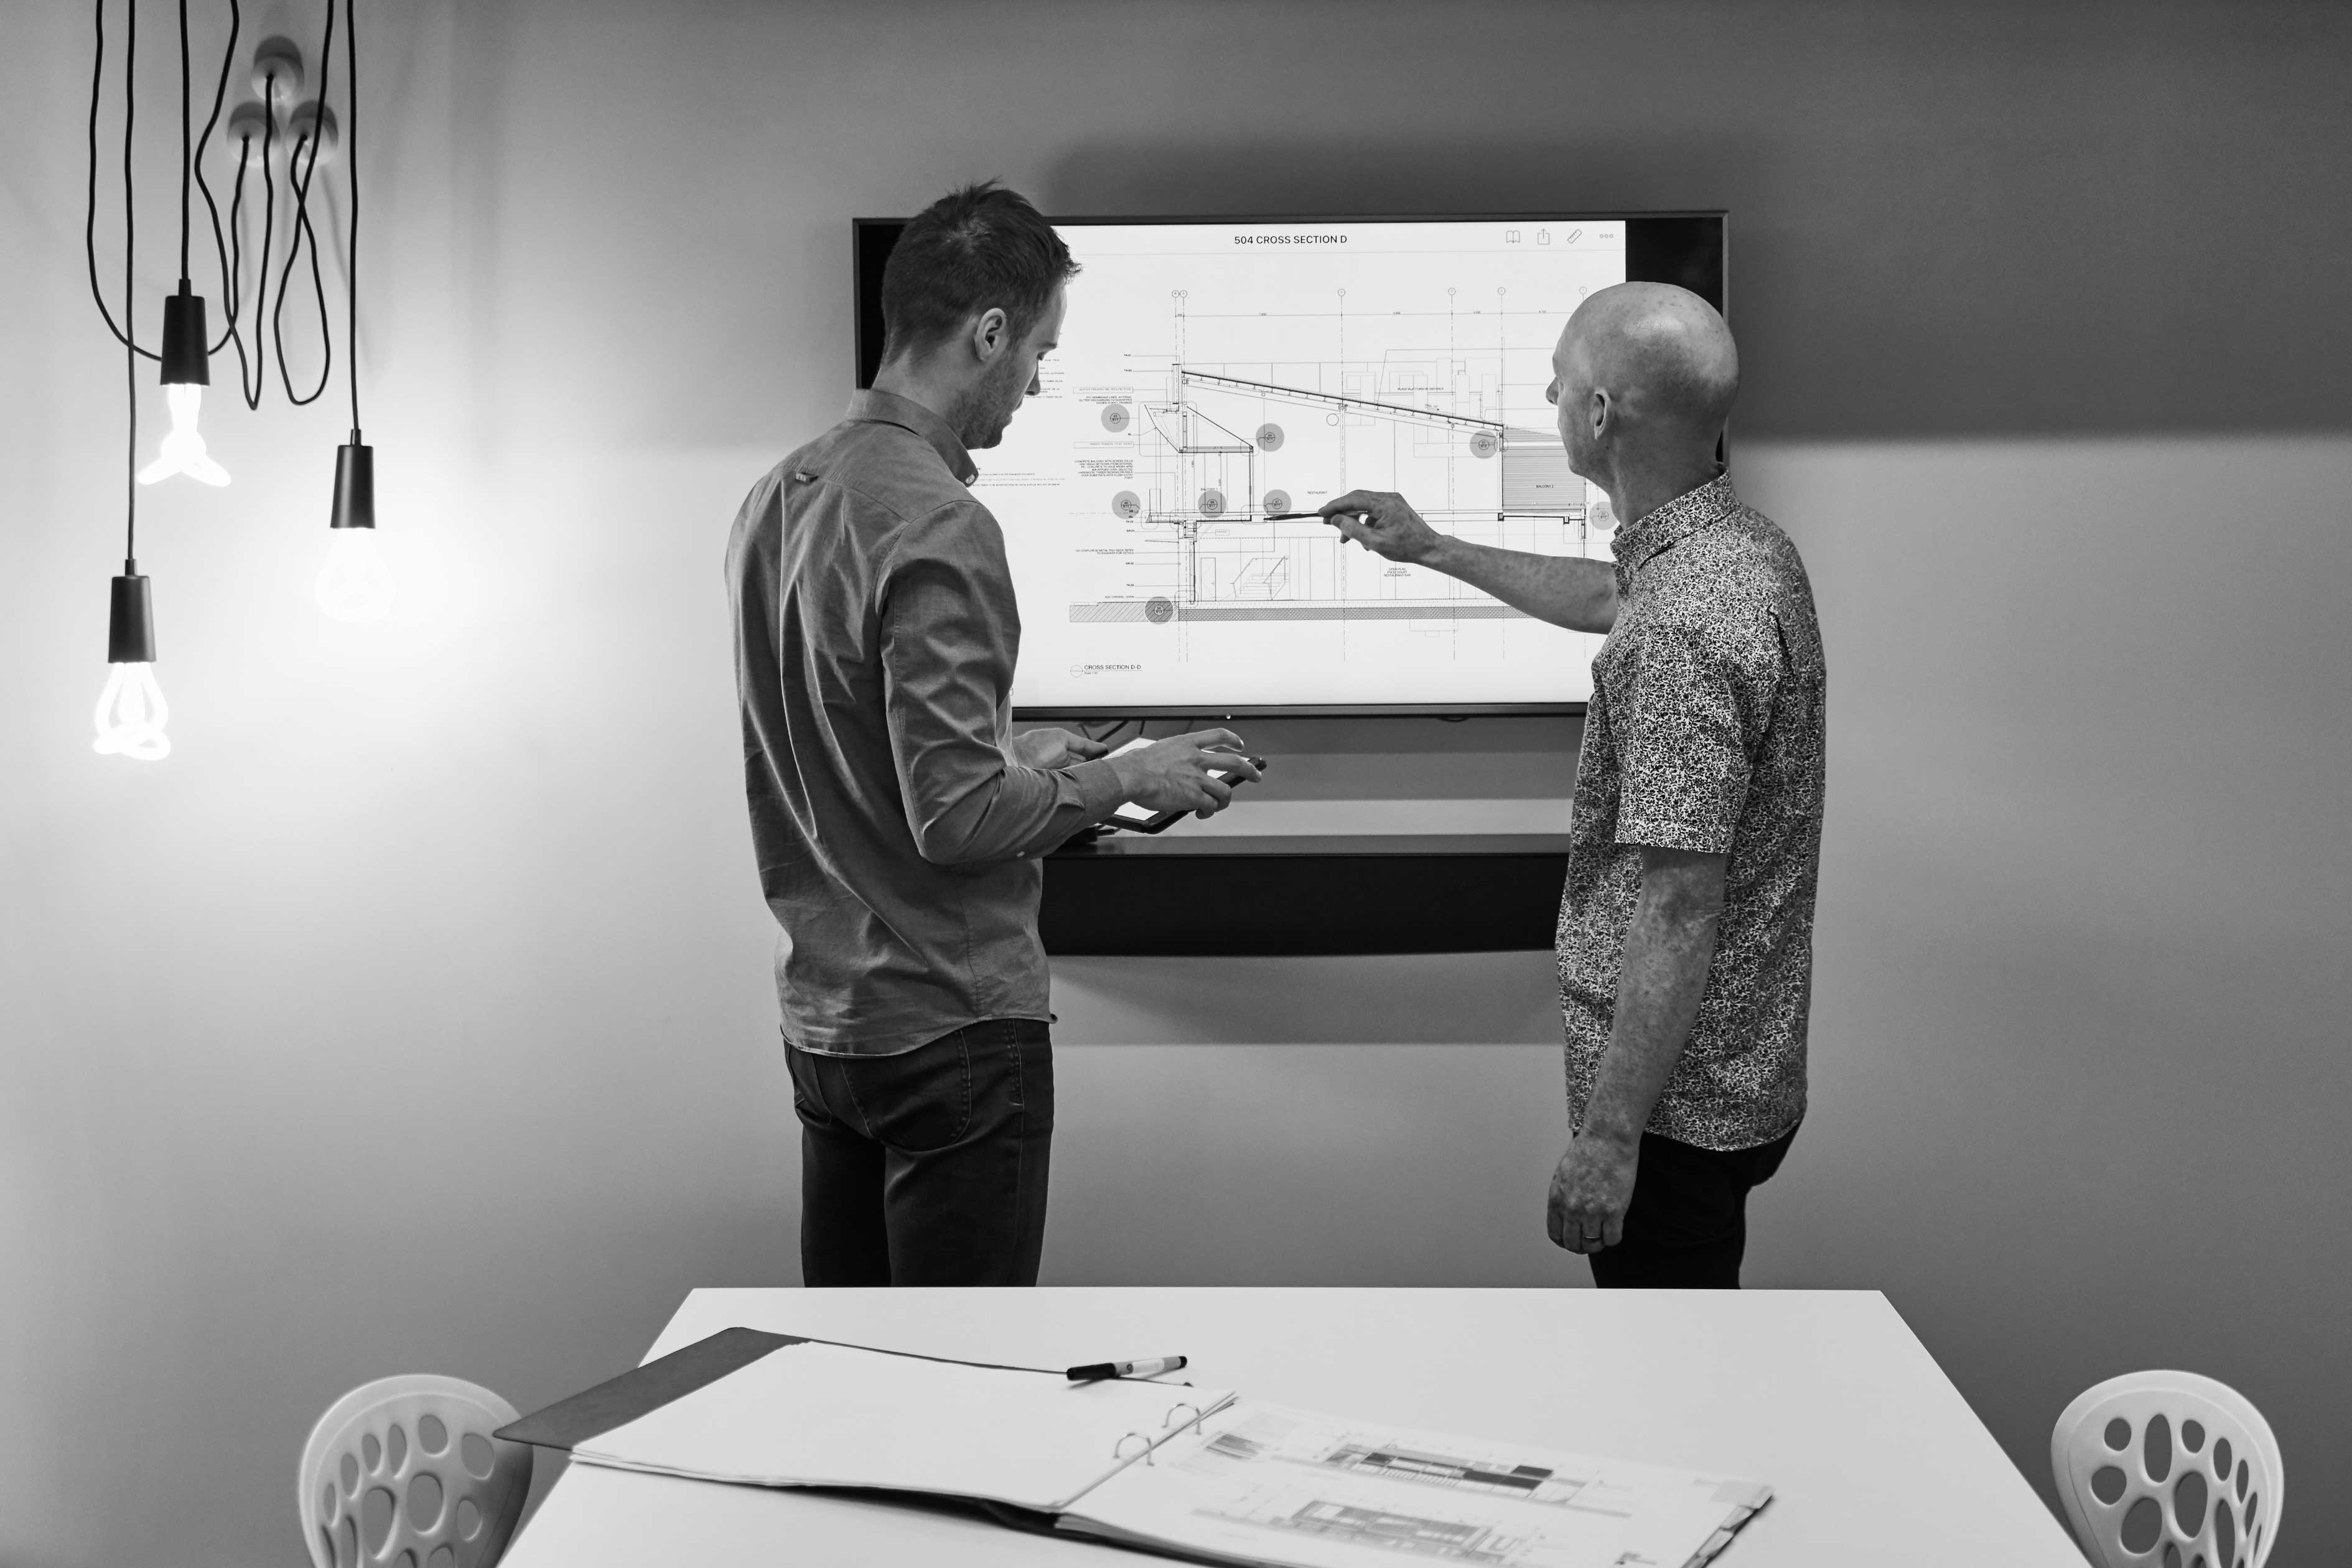 Dean and Nick engaged in work at a wall-mounted digital display